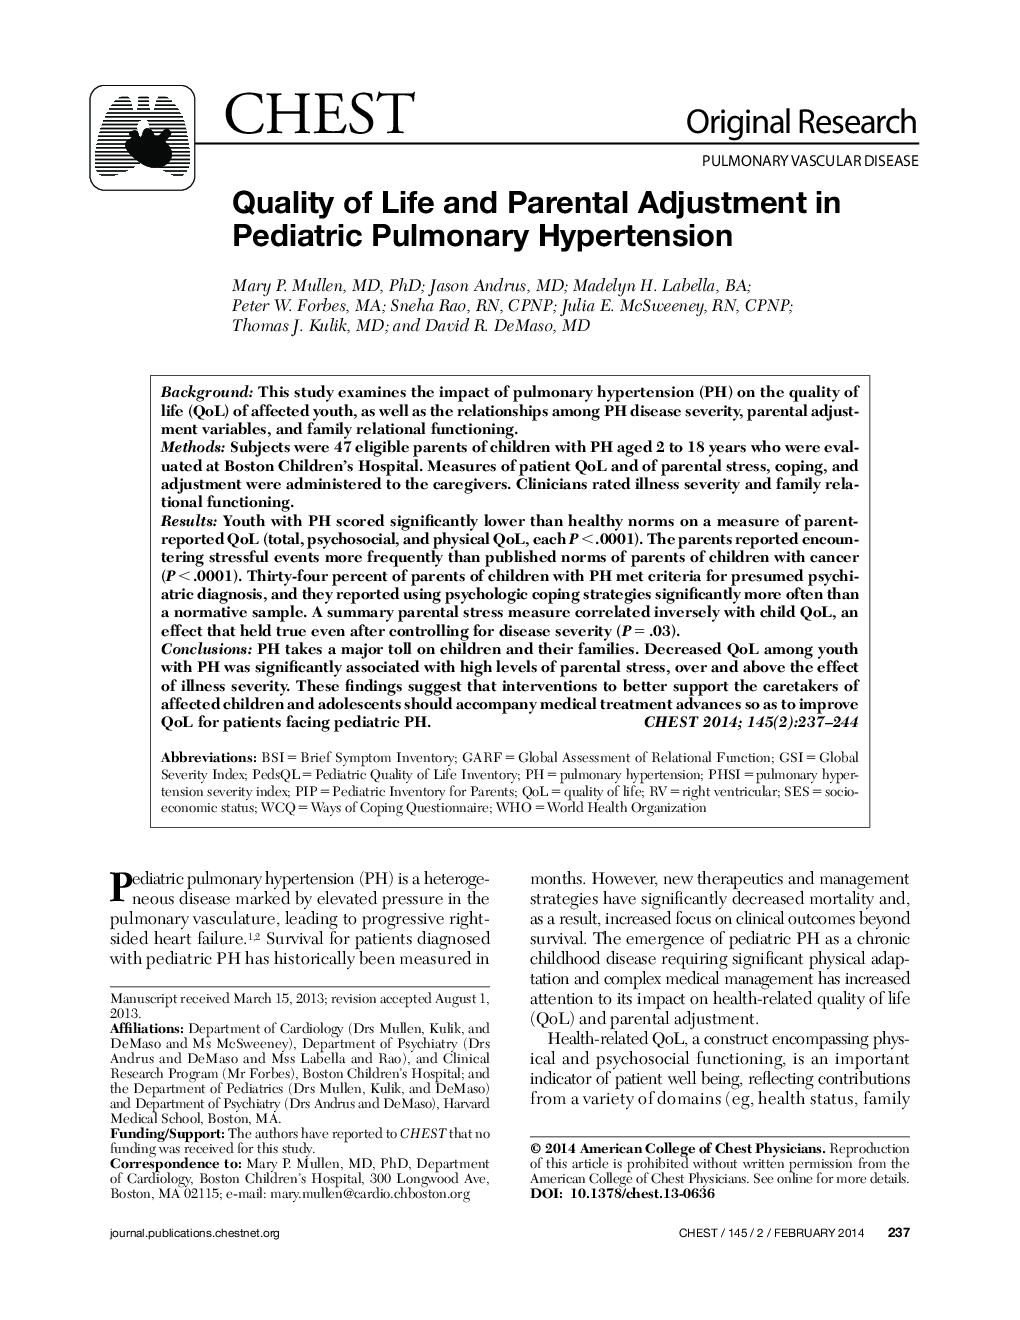 Quality of Life and Parental Adjustment in Pediatric Pulmonary Hypertension